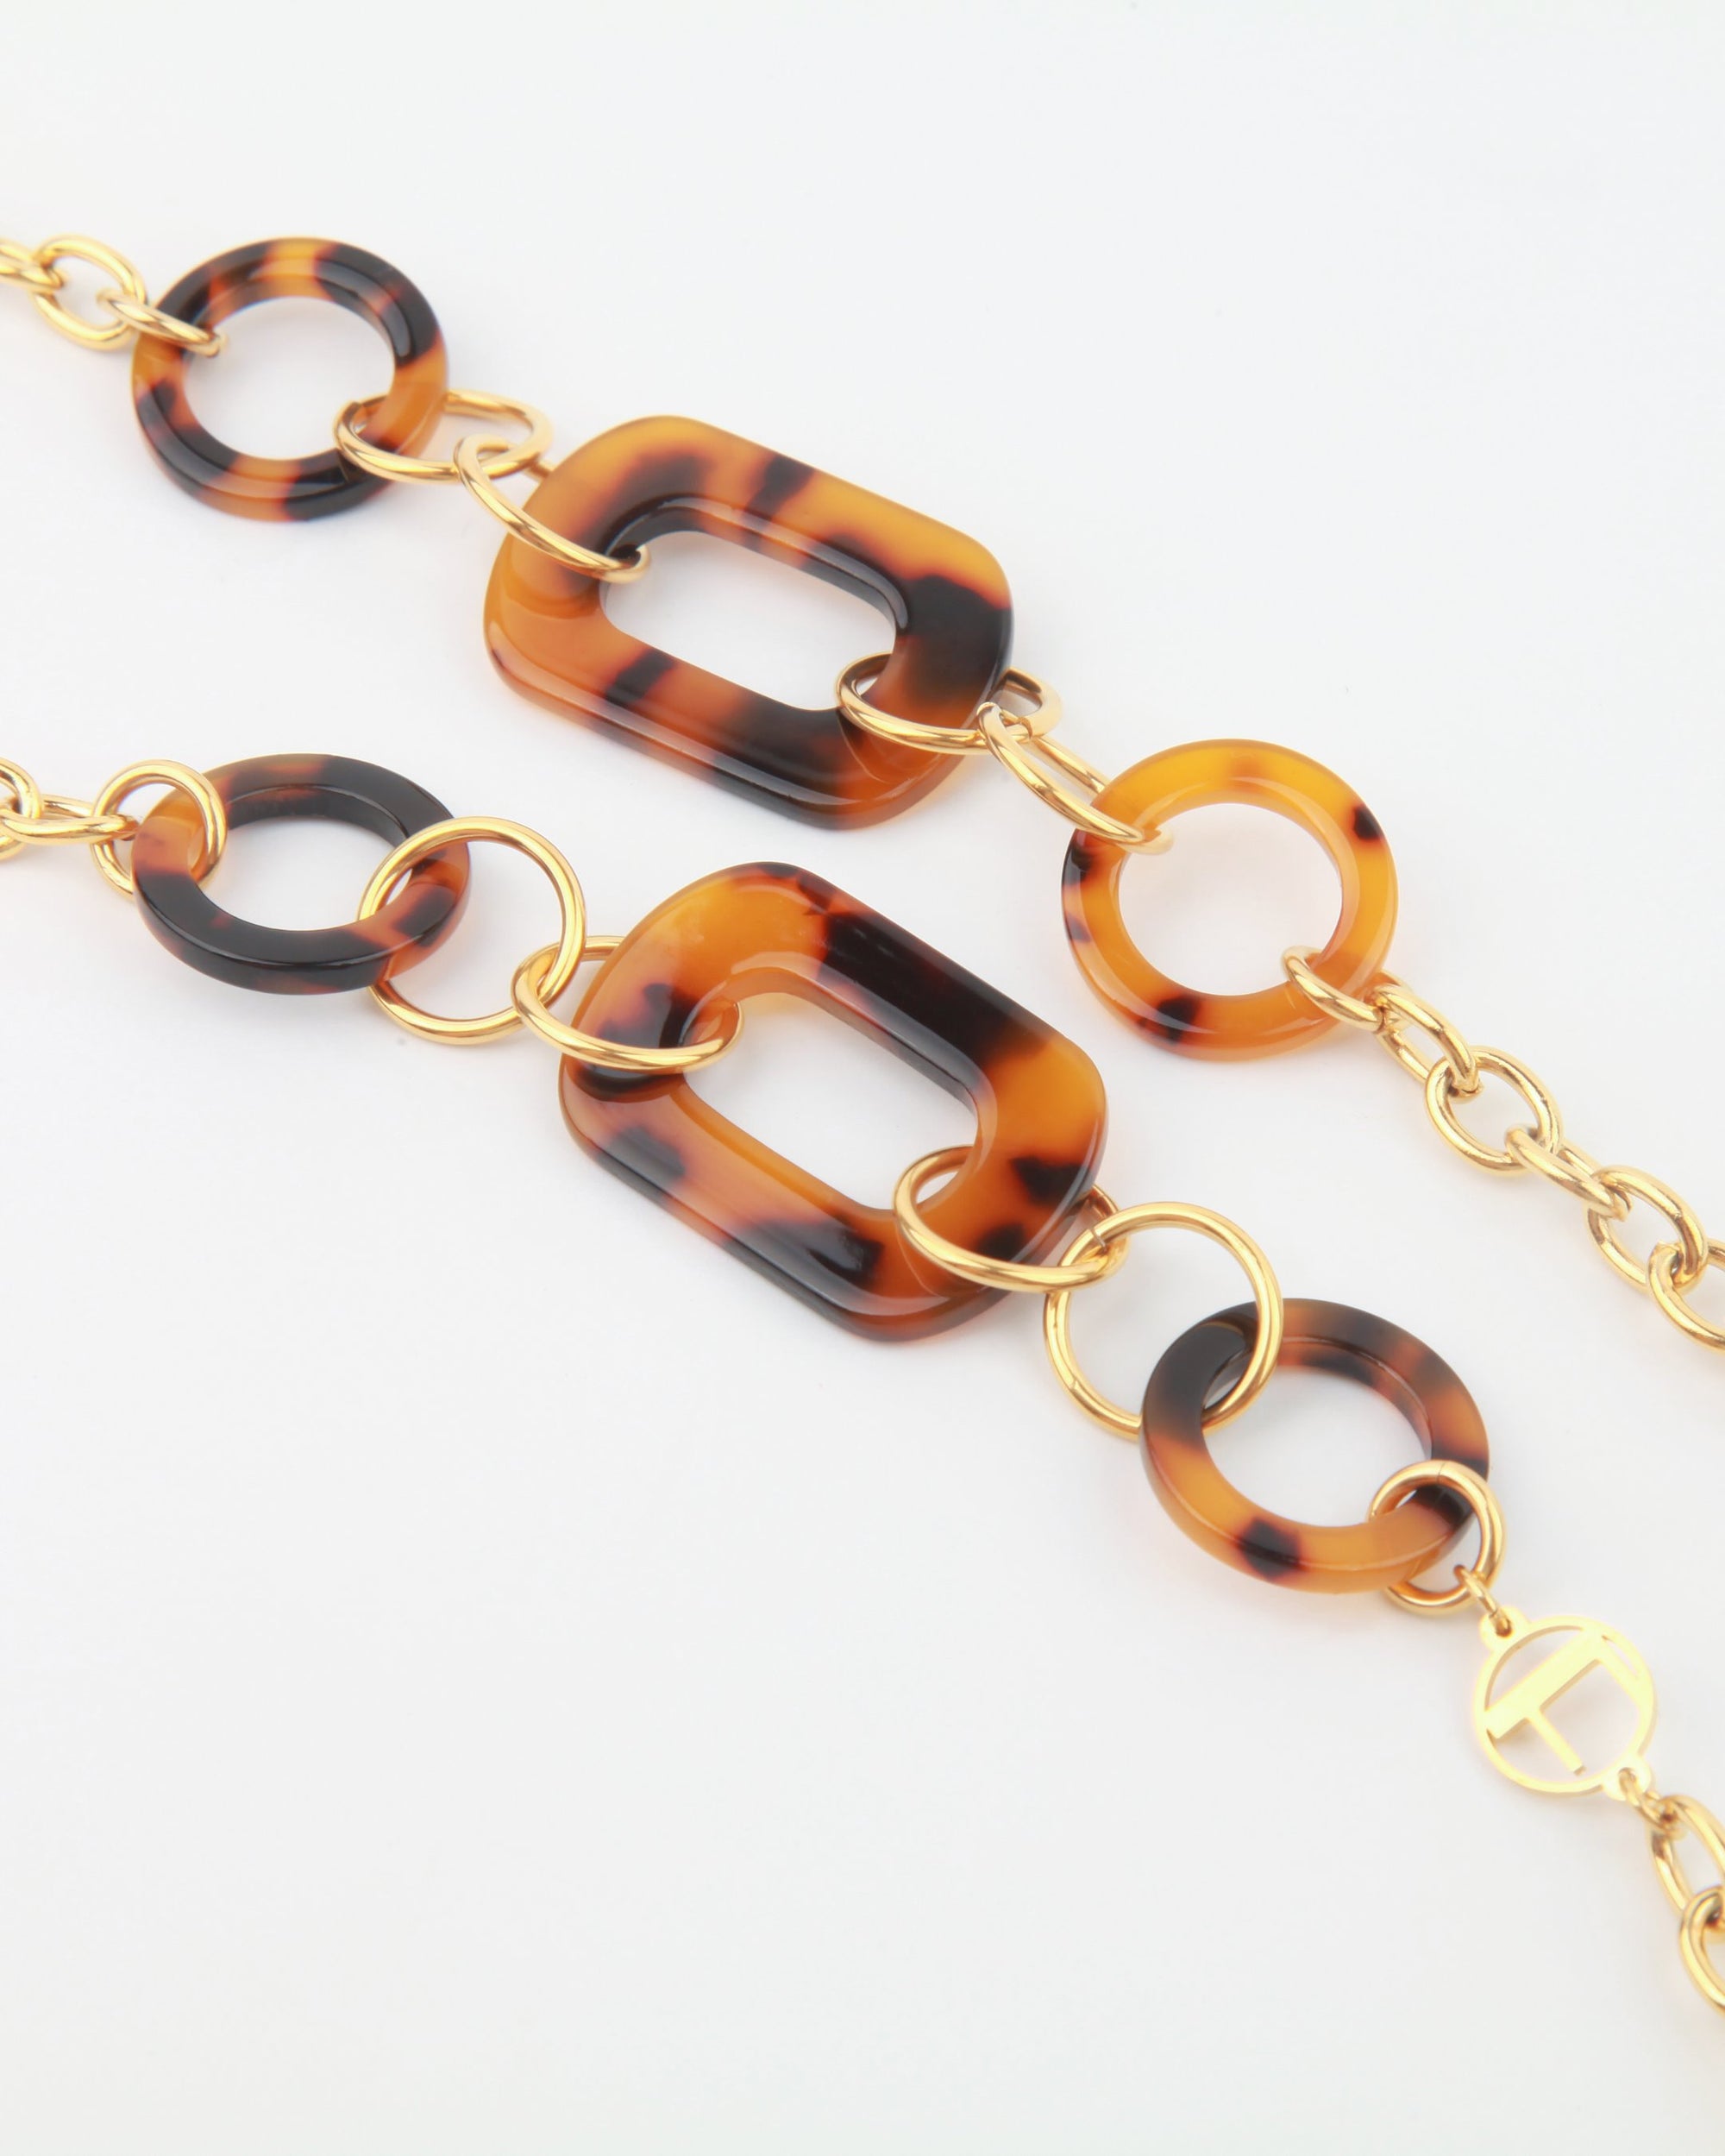 A close-up view of a stylish chain necklace featuring alternating large tortoiseshell oval links and smaller circular links, connected by 18-karat gold-plated rings. The NYC Glasses Chain by For Art&#39;s Sake® has a sophisticated, modern design with oversized acetate links and is displayed against a plain white background.